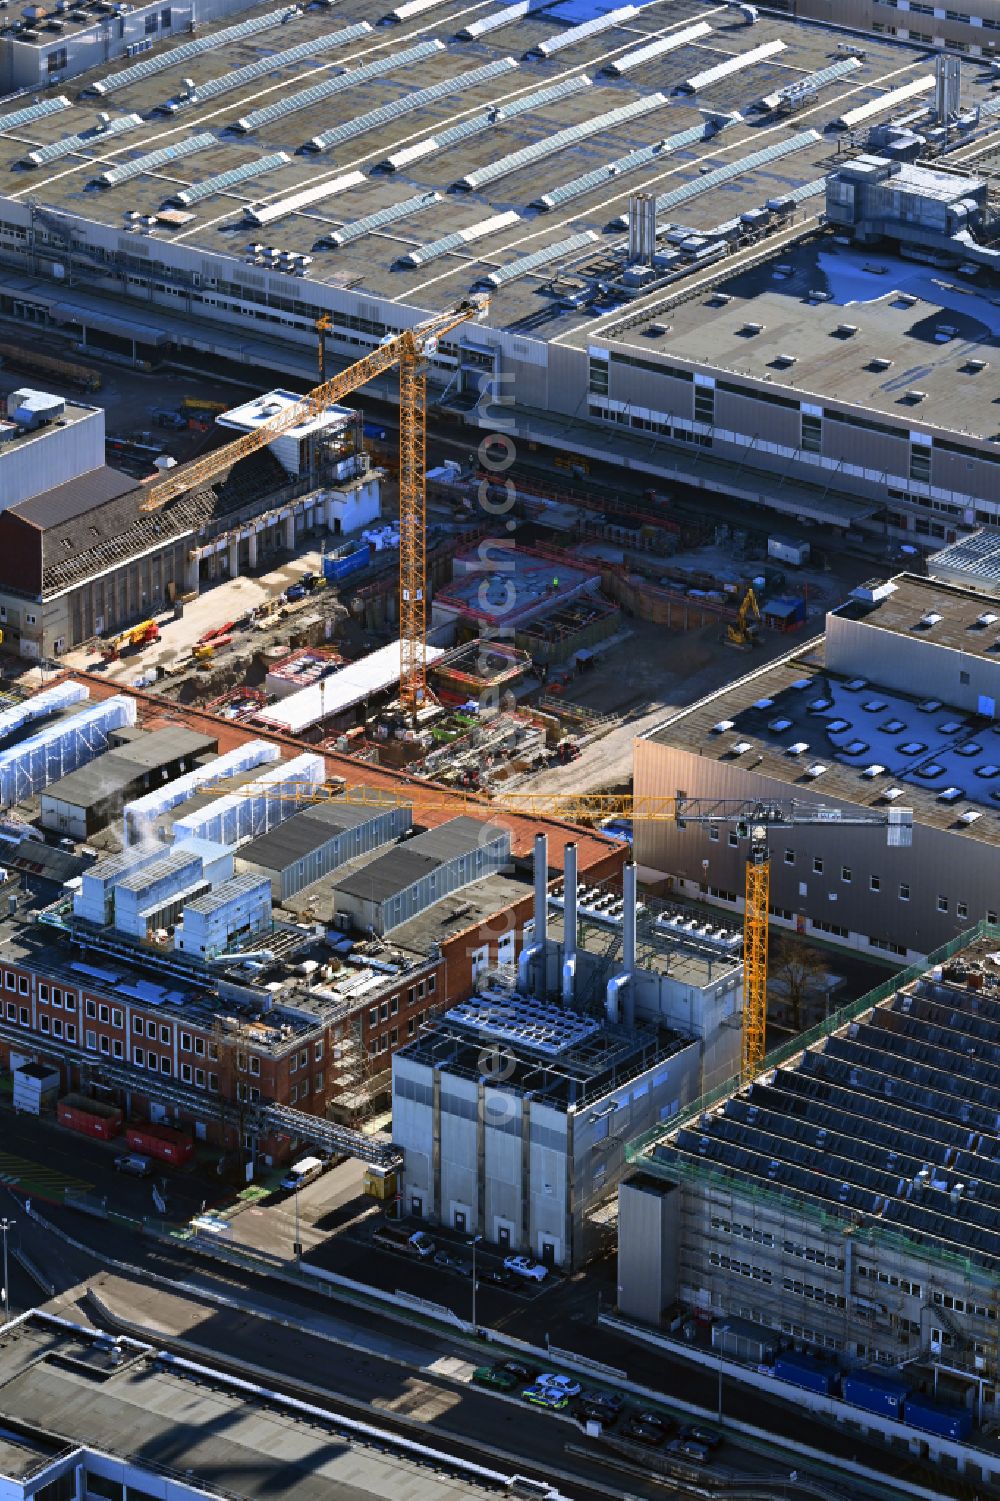 München from above - Expansion - new construction - construction site on the buildings and production halls of the factory premises at the combined heat and power plant of the BMW factory on Hochregalstrasse in the district of Milbertshofen in Munich in the state Bavaria, Germany